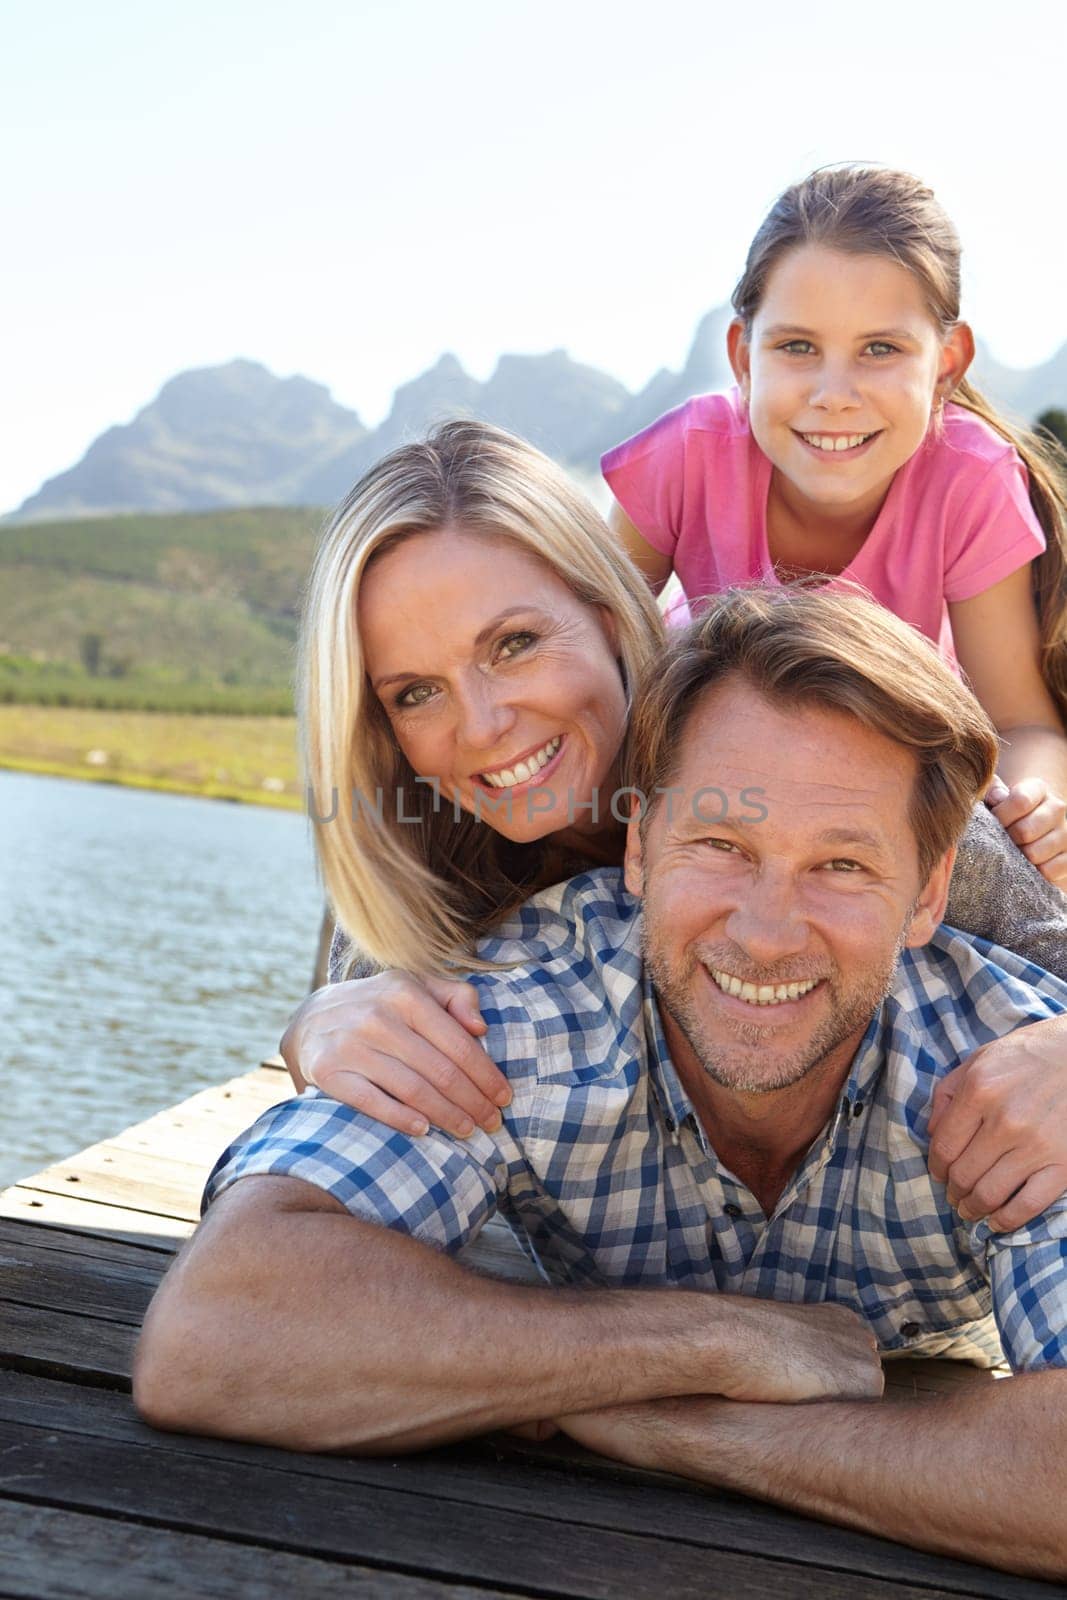 Smile, lake and portrait of family in nature for summer vacation, weekend trip and bonding together. Man, woman and relax with daughter outdoors for happiness, adventure and tourism travel in Europe.